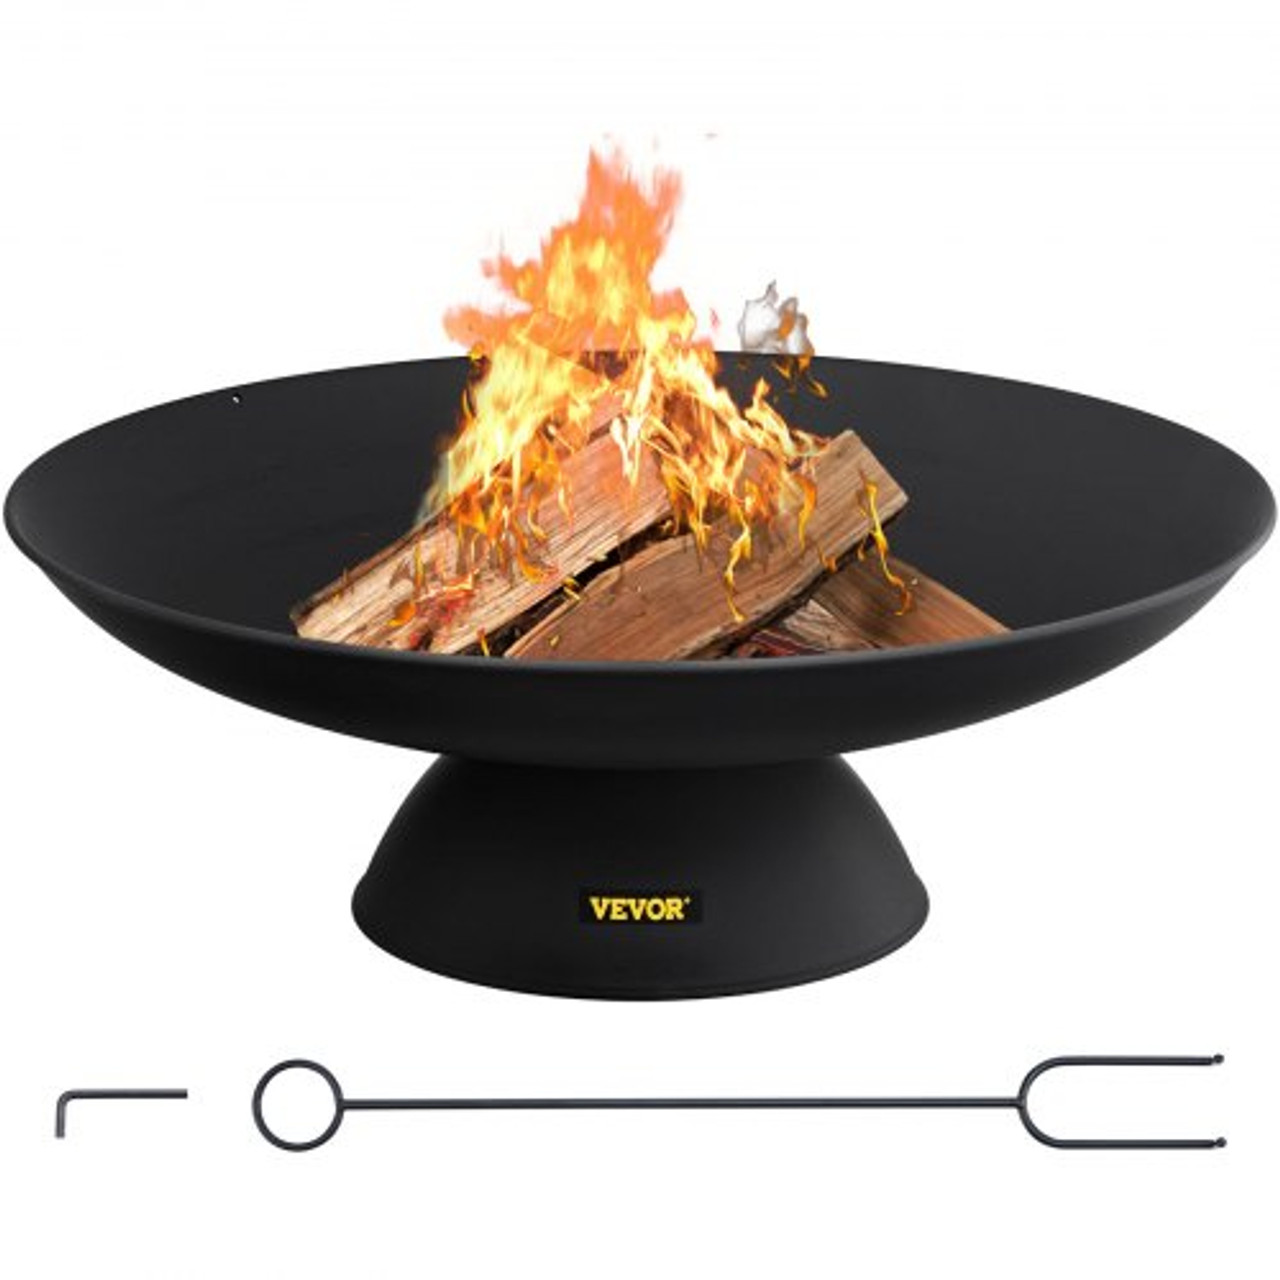 Fire Pit Bowl, 30-Inch Deep Round Cast Iron Fire Bowl, Wood Burning for Outdoor Patios, Backyards & Camping Uses, with A Stable Bowl Designed Base and A Firewood Stick, Black